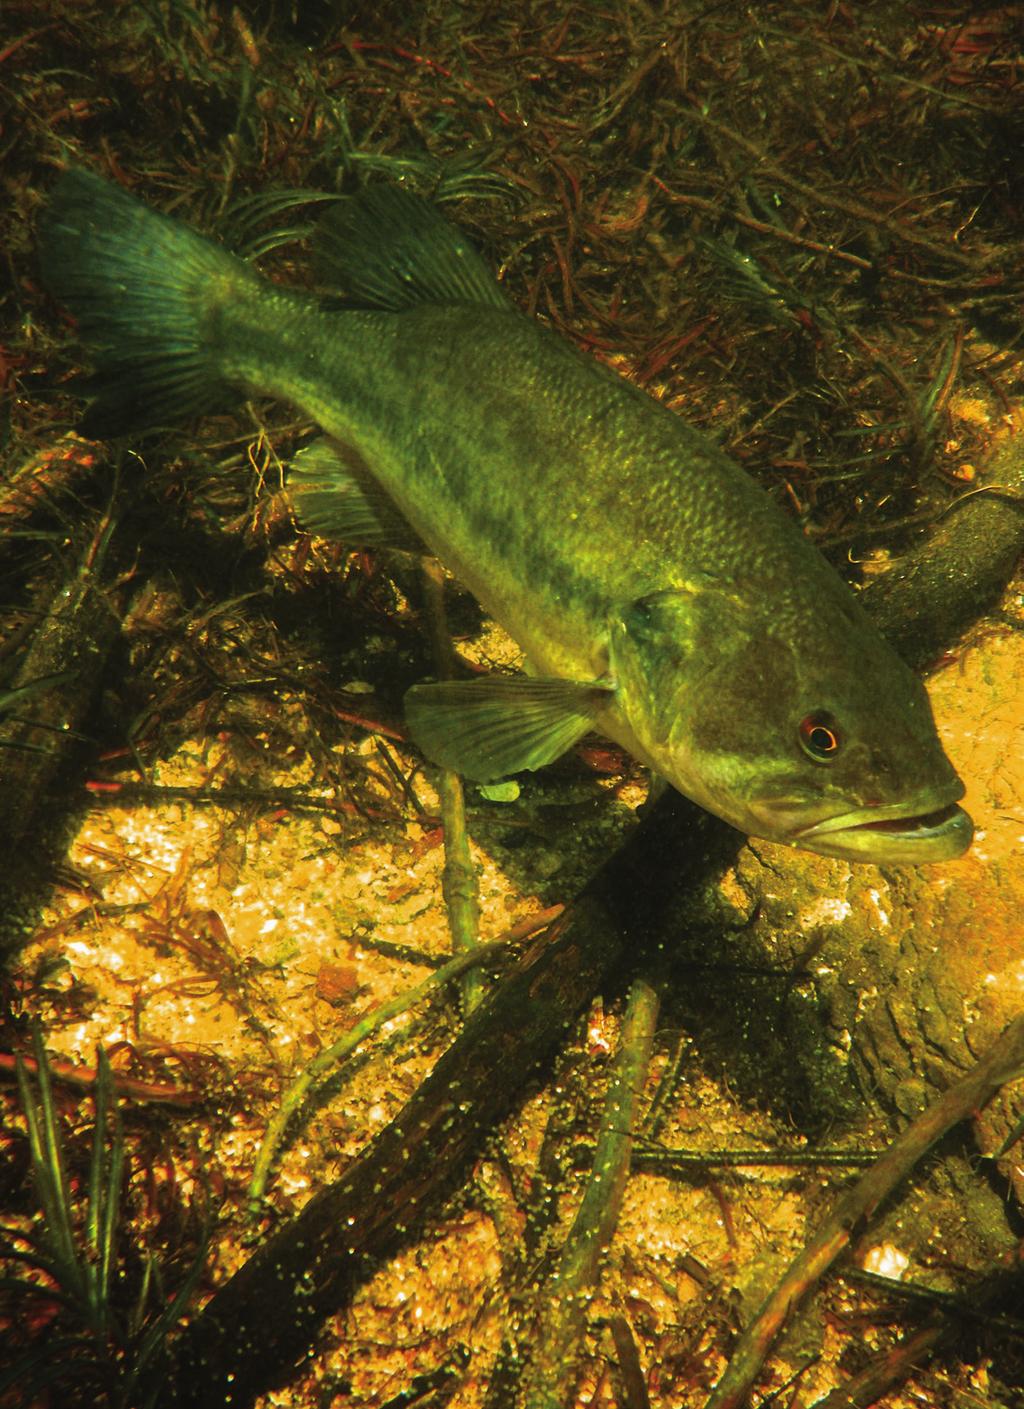 FACTORS AFFECTING RECRUITMENT IN SMALLMOUTH AND LARGEMOUTH BASS Understanding how life history, reproduction and recruitment intersect to determine population dynamics is fundamental to effective